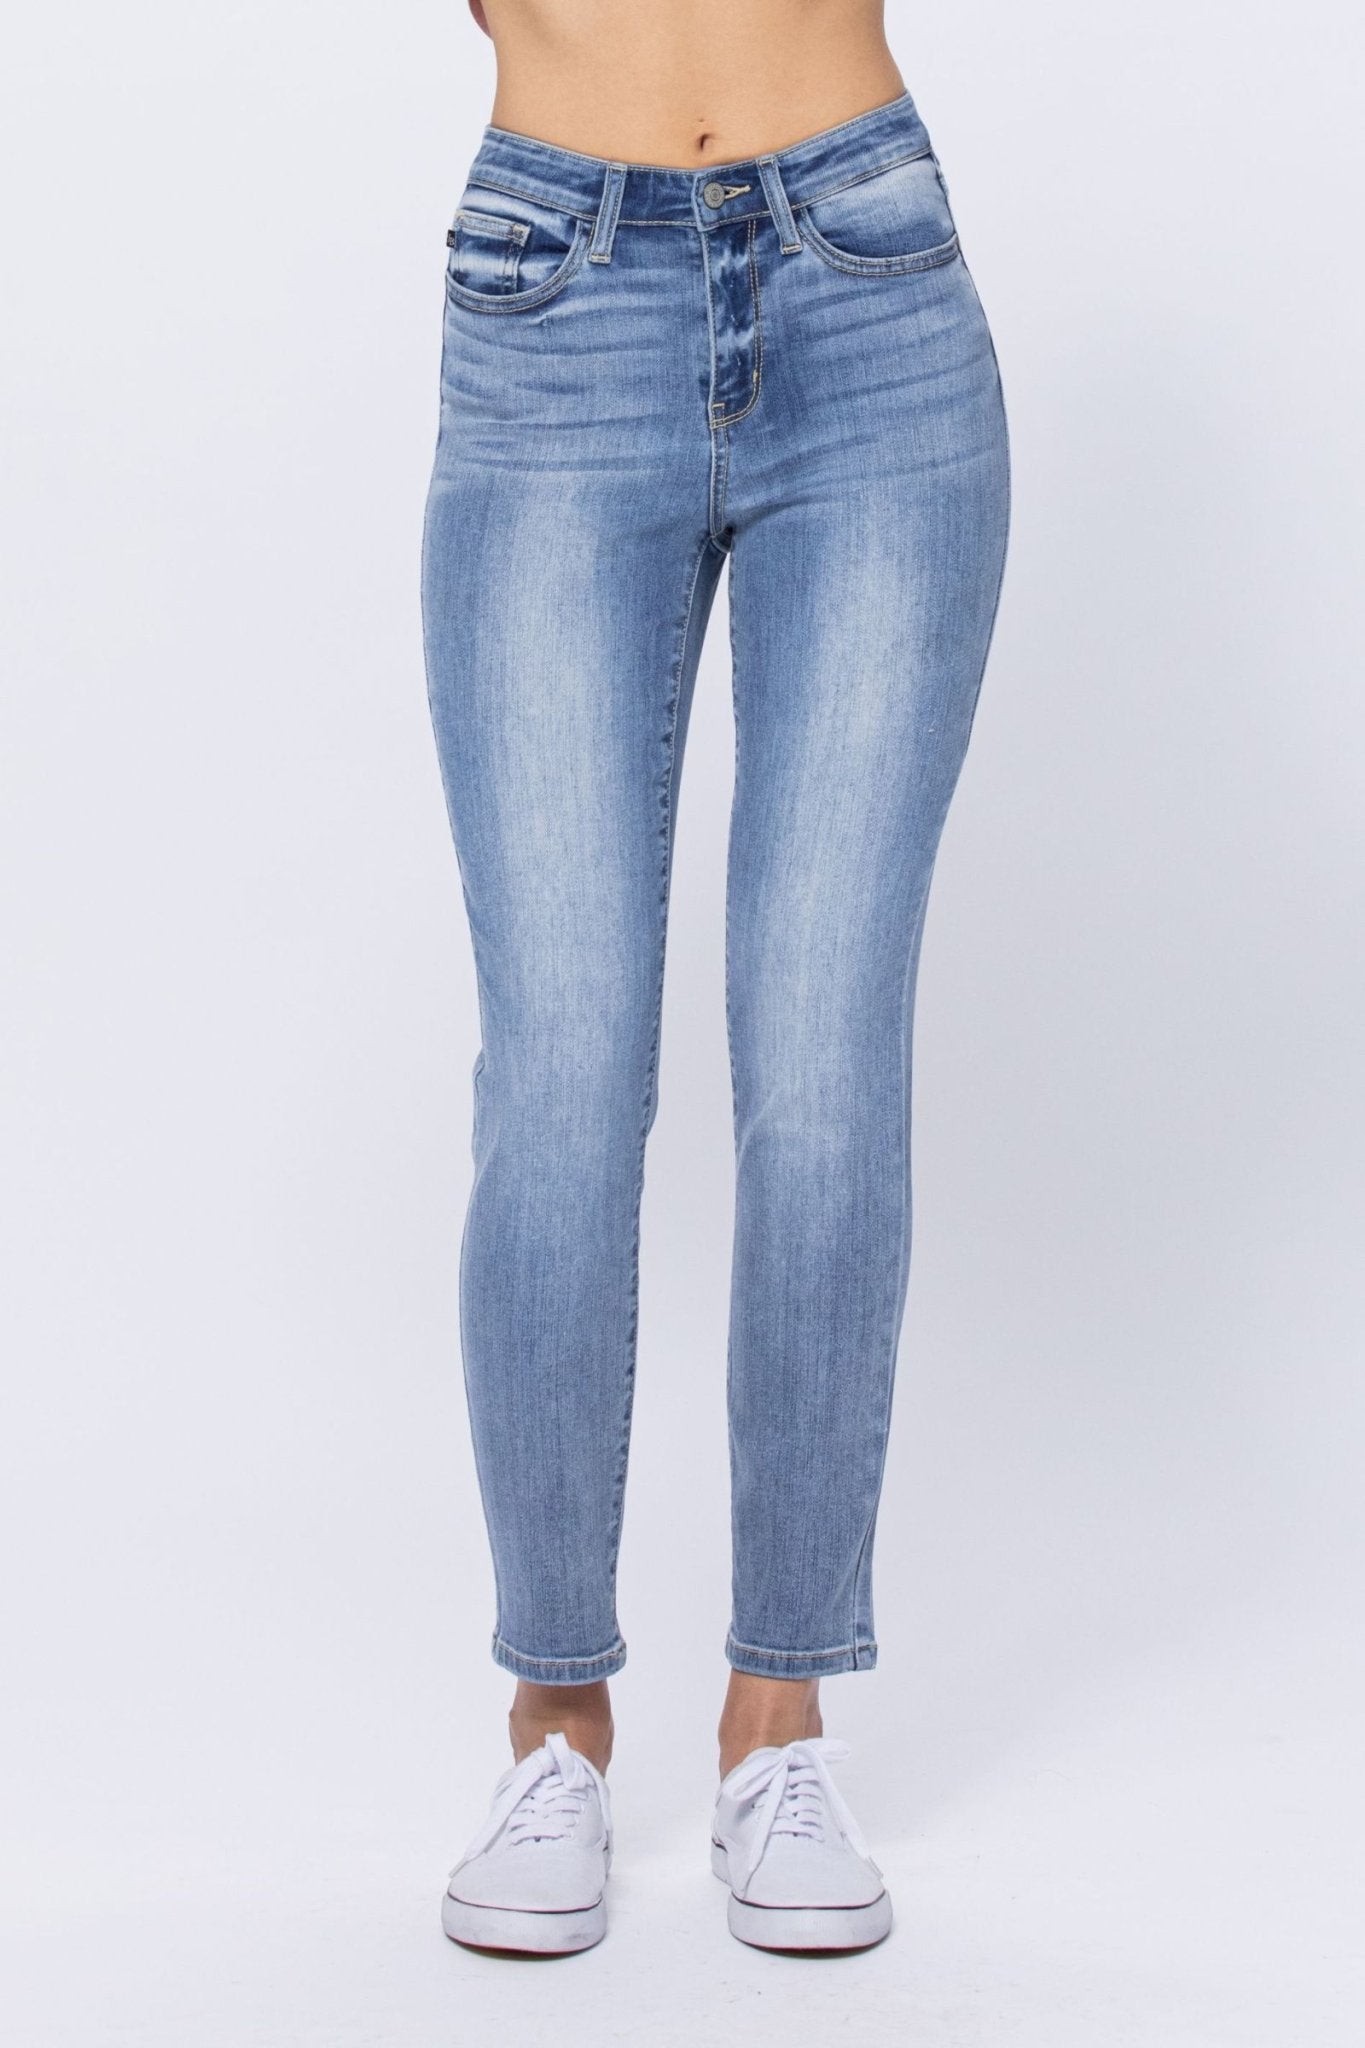 Monroe Relaxed Fit Light Wash Jeans - Lavender Hills BeautyJudy Blue